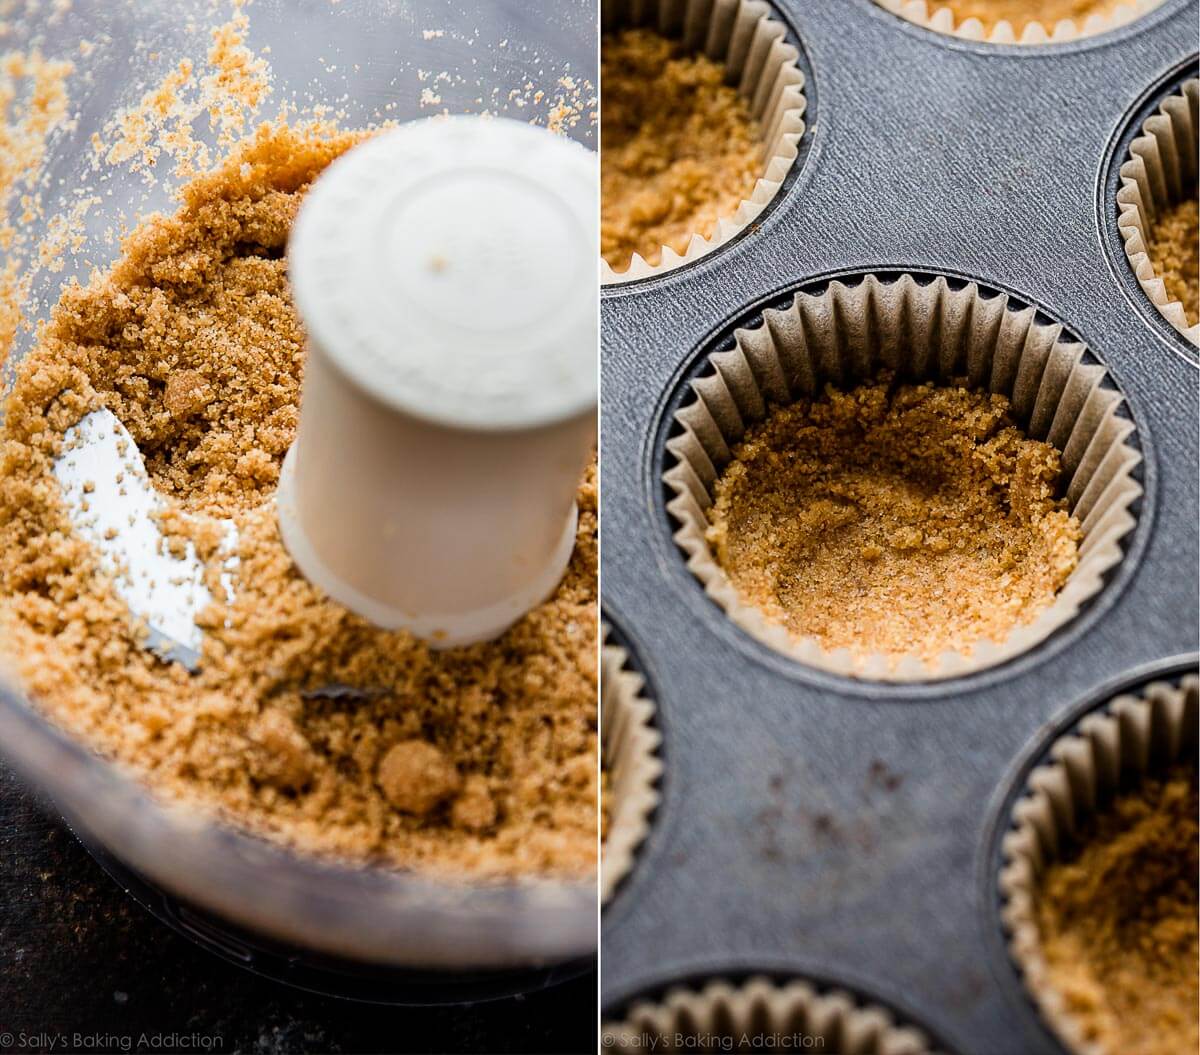 2 images of graham cracker crust mixture in a food processor and pressed into the bottoms of cupcake liners in a cupcake pan